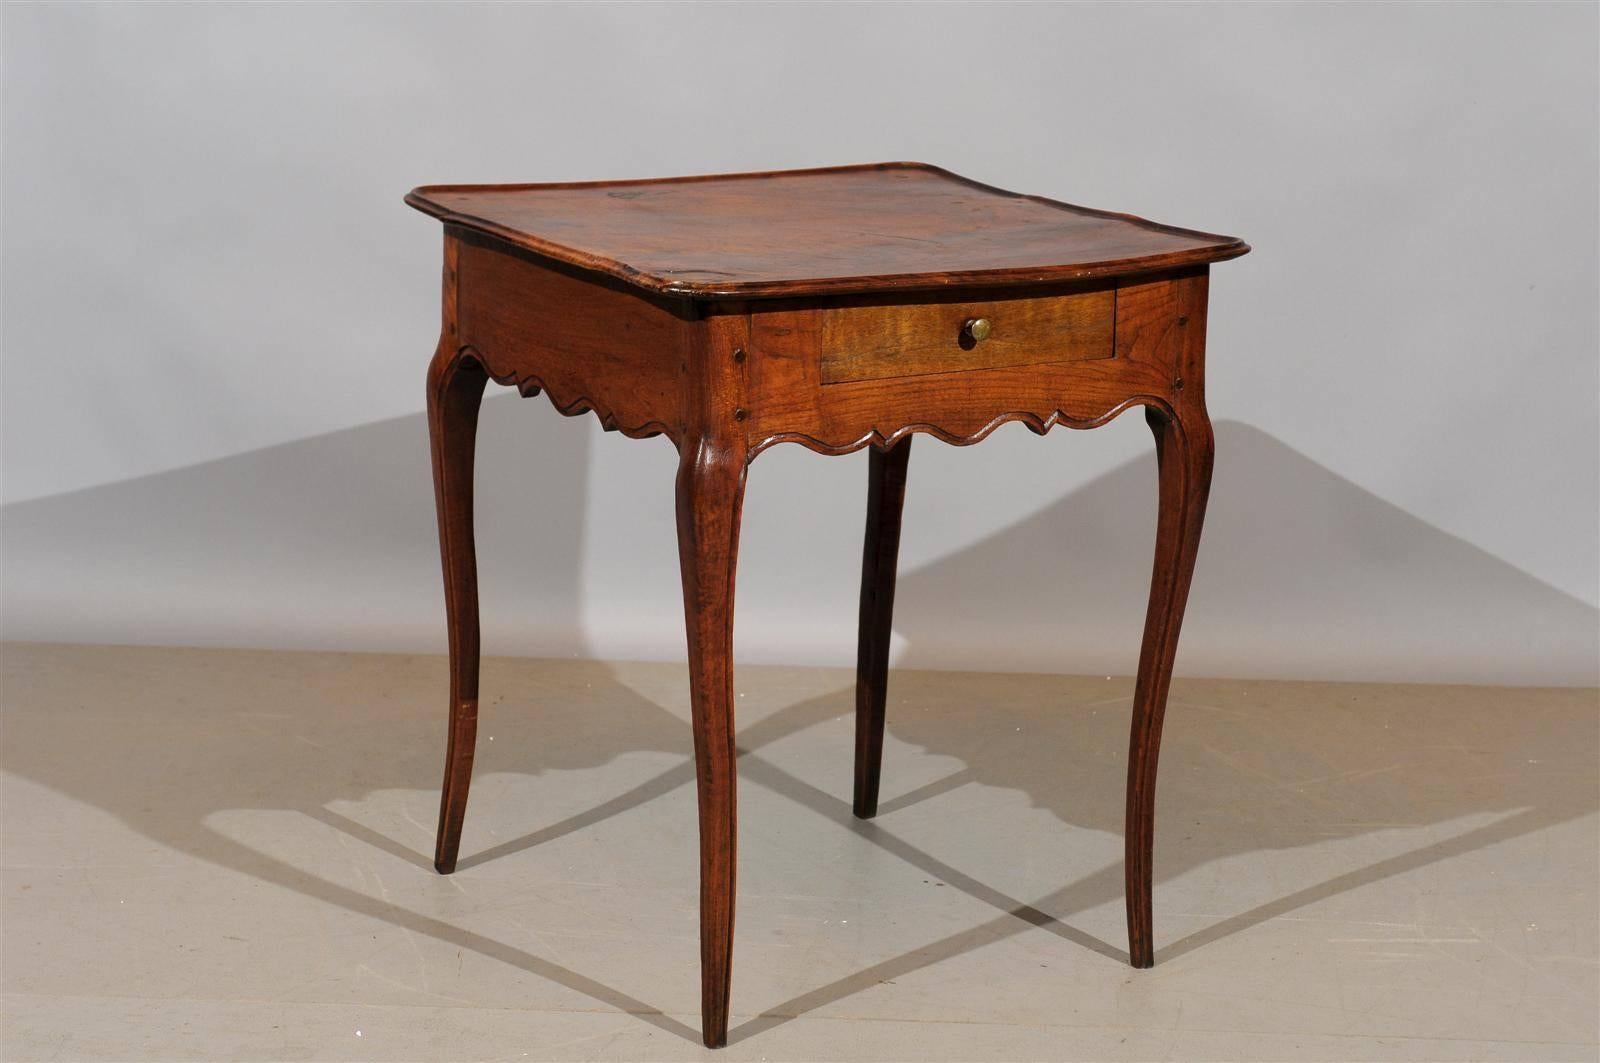 A Louis XV walnut square side table with drawer carved apron, cabriole legs and drawer.  

To view all our inventory, please visit our personal website. 

William Word Fine Antiques: Atlanta's source for antique interiors since 1956. 
